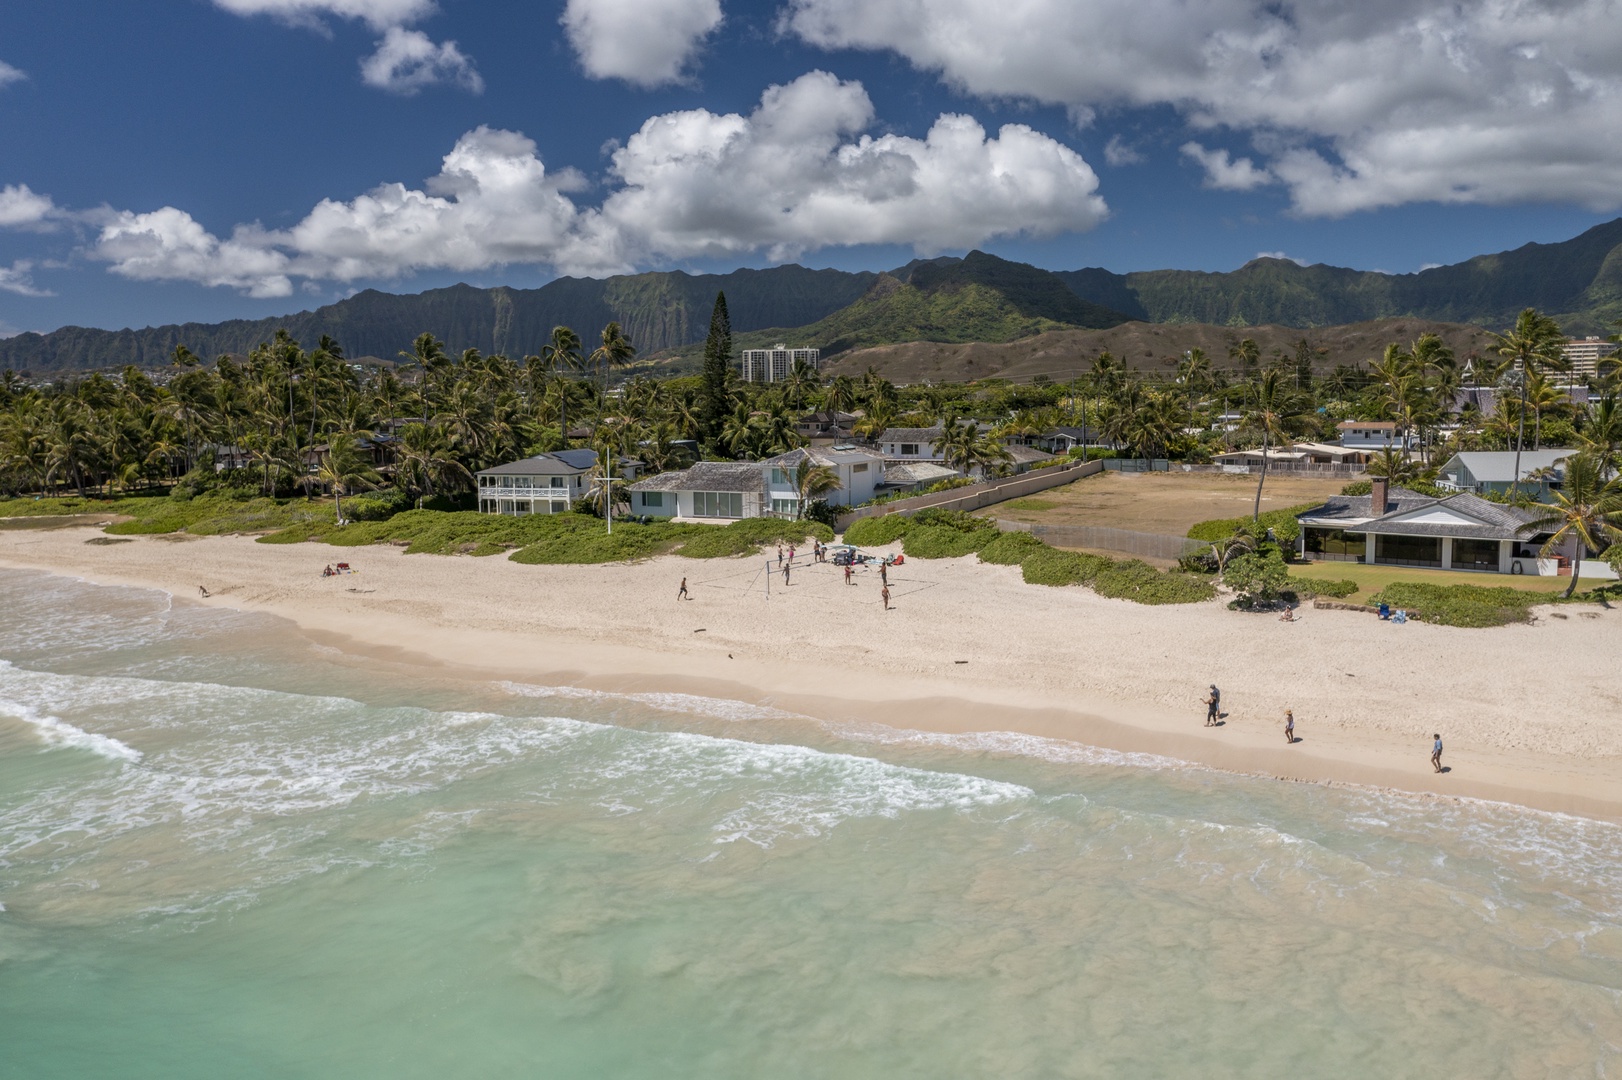 Kailua Vacation Rentals, Ranch Beach Estate - From your door to the shore: Experience the ease of beach living at Ranch Beach House.